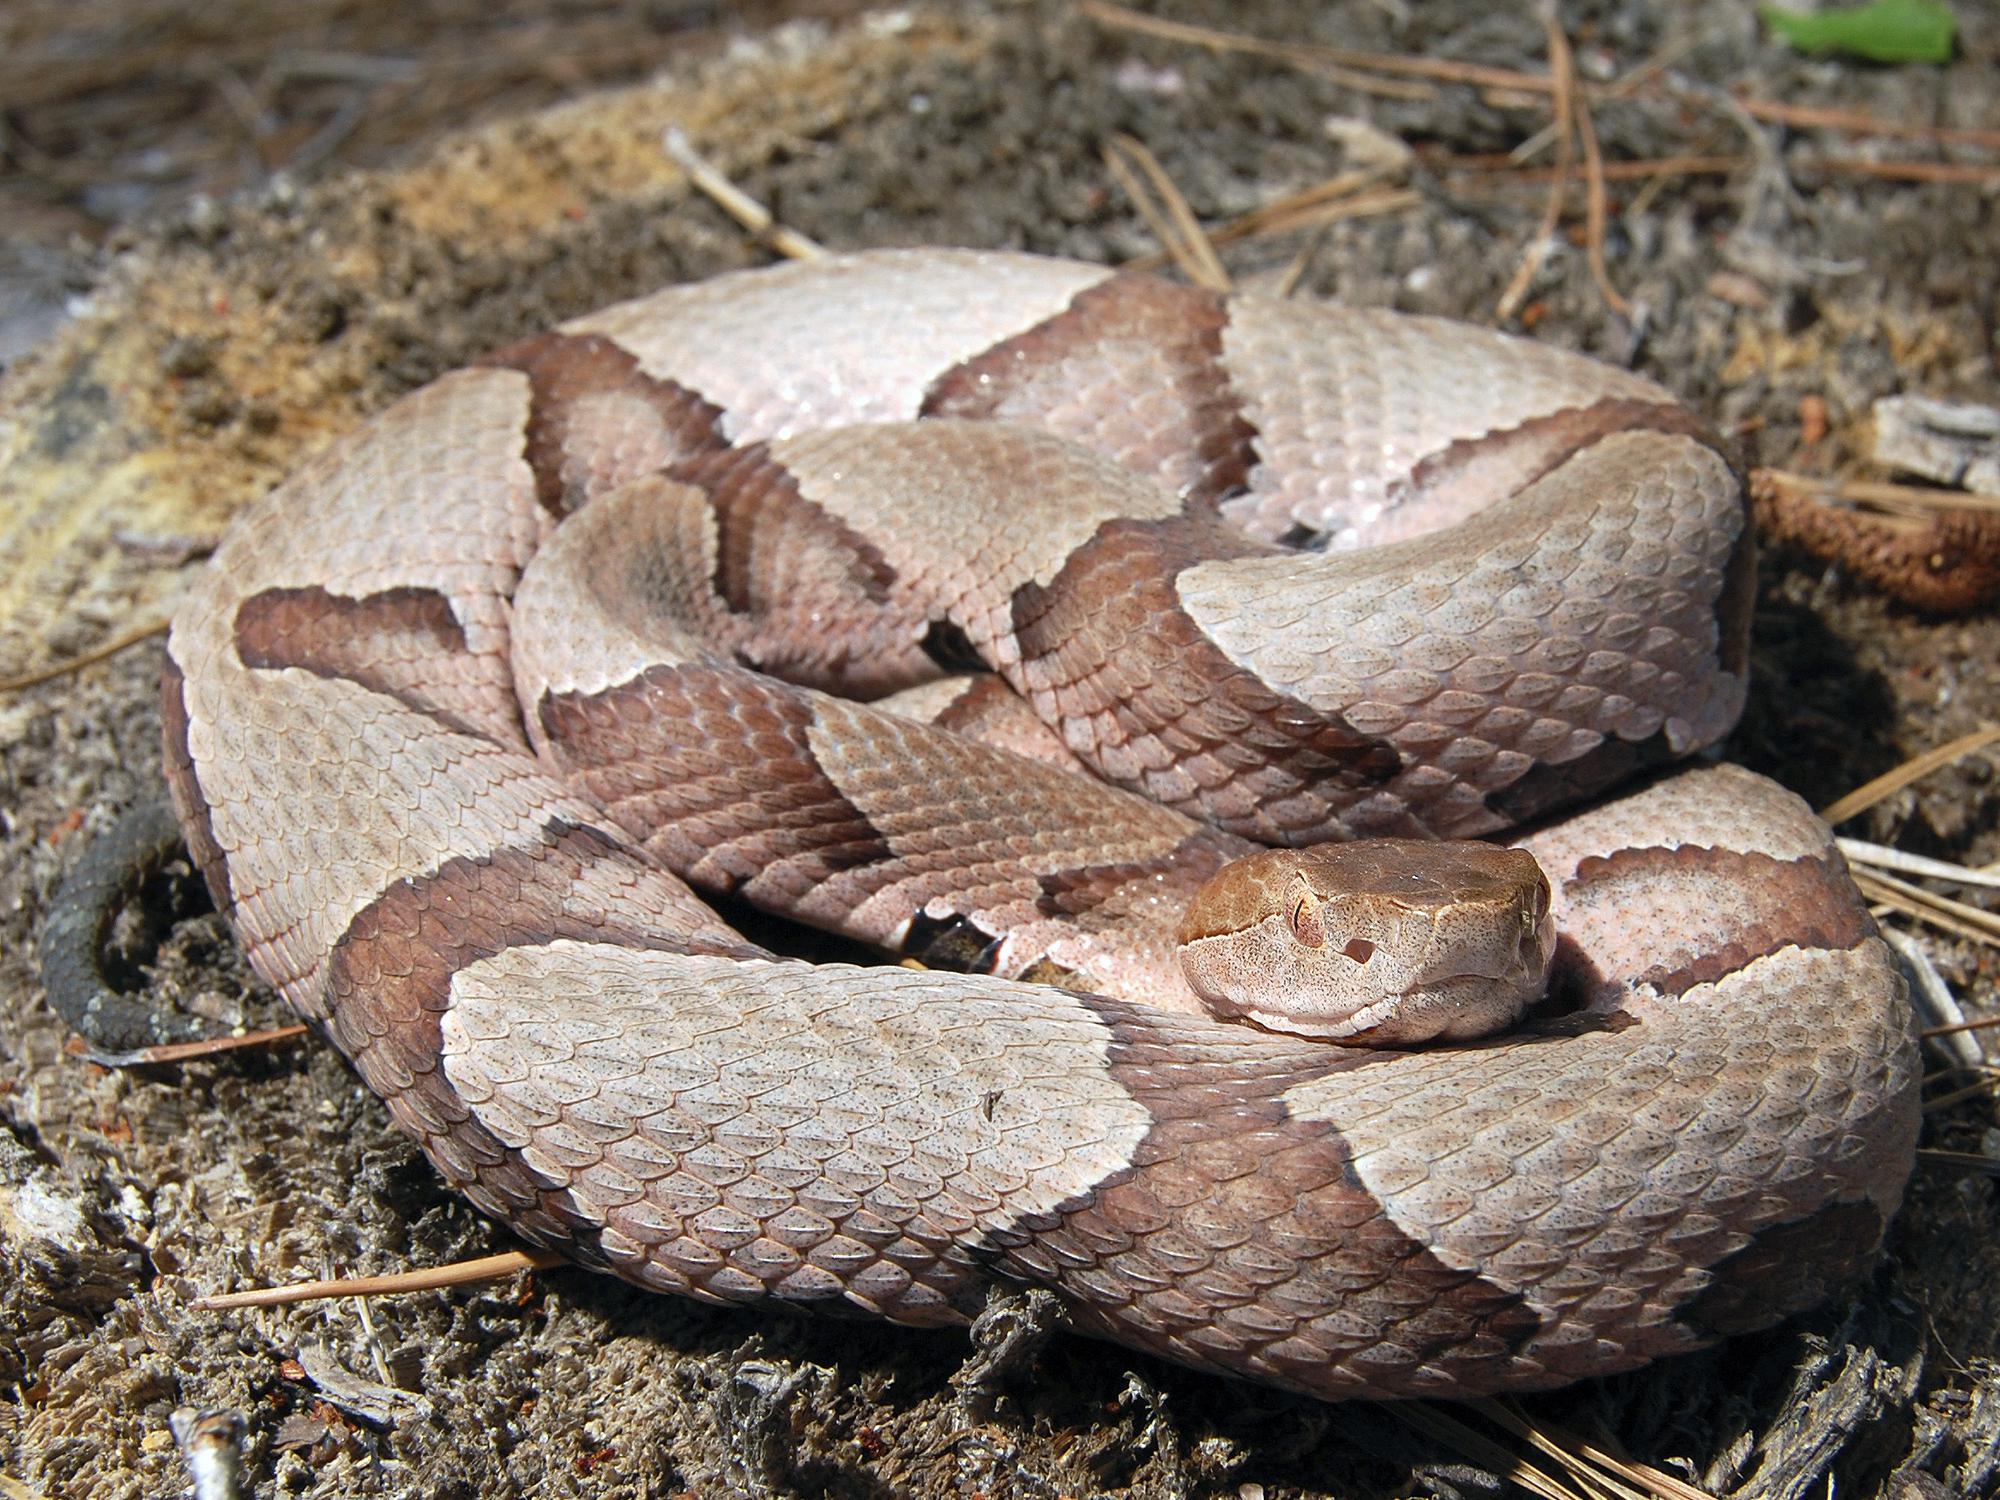 Adult venomous snakes, like this copperhead, will use camouflage or run away to avoid conflict, rather than strike first. (Photo from iStock.)